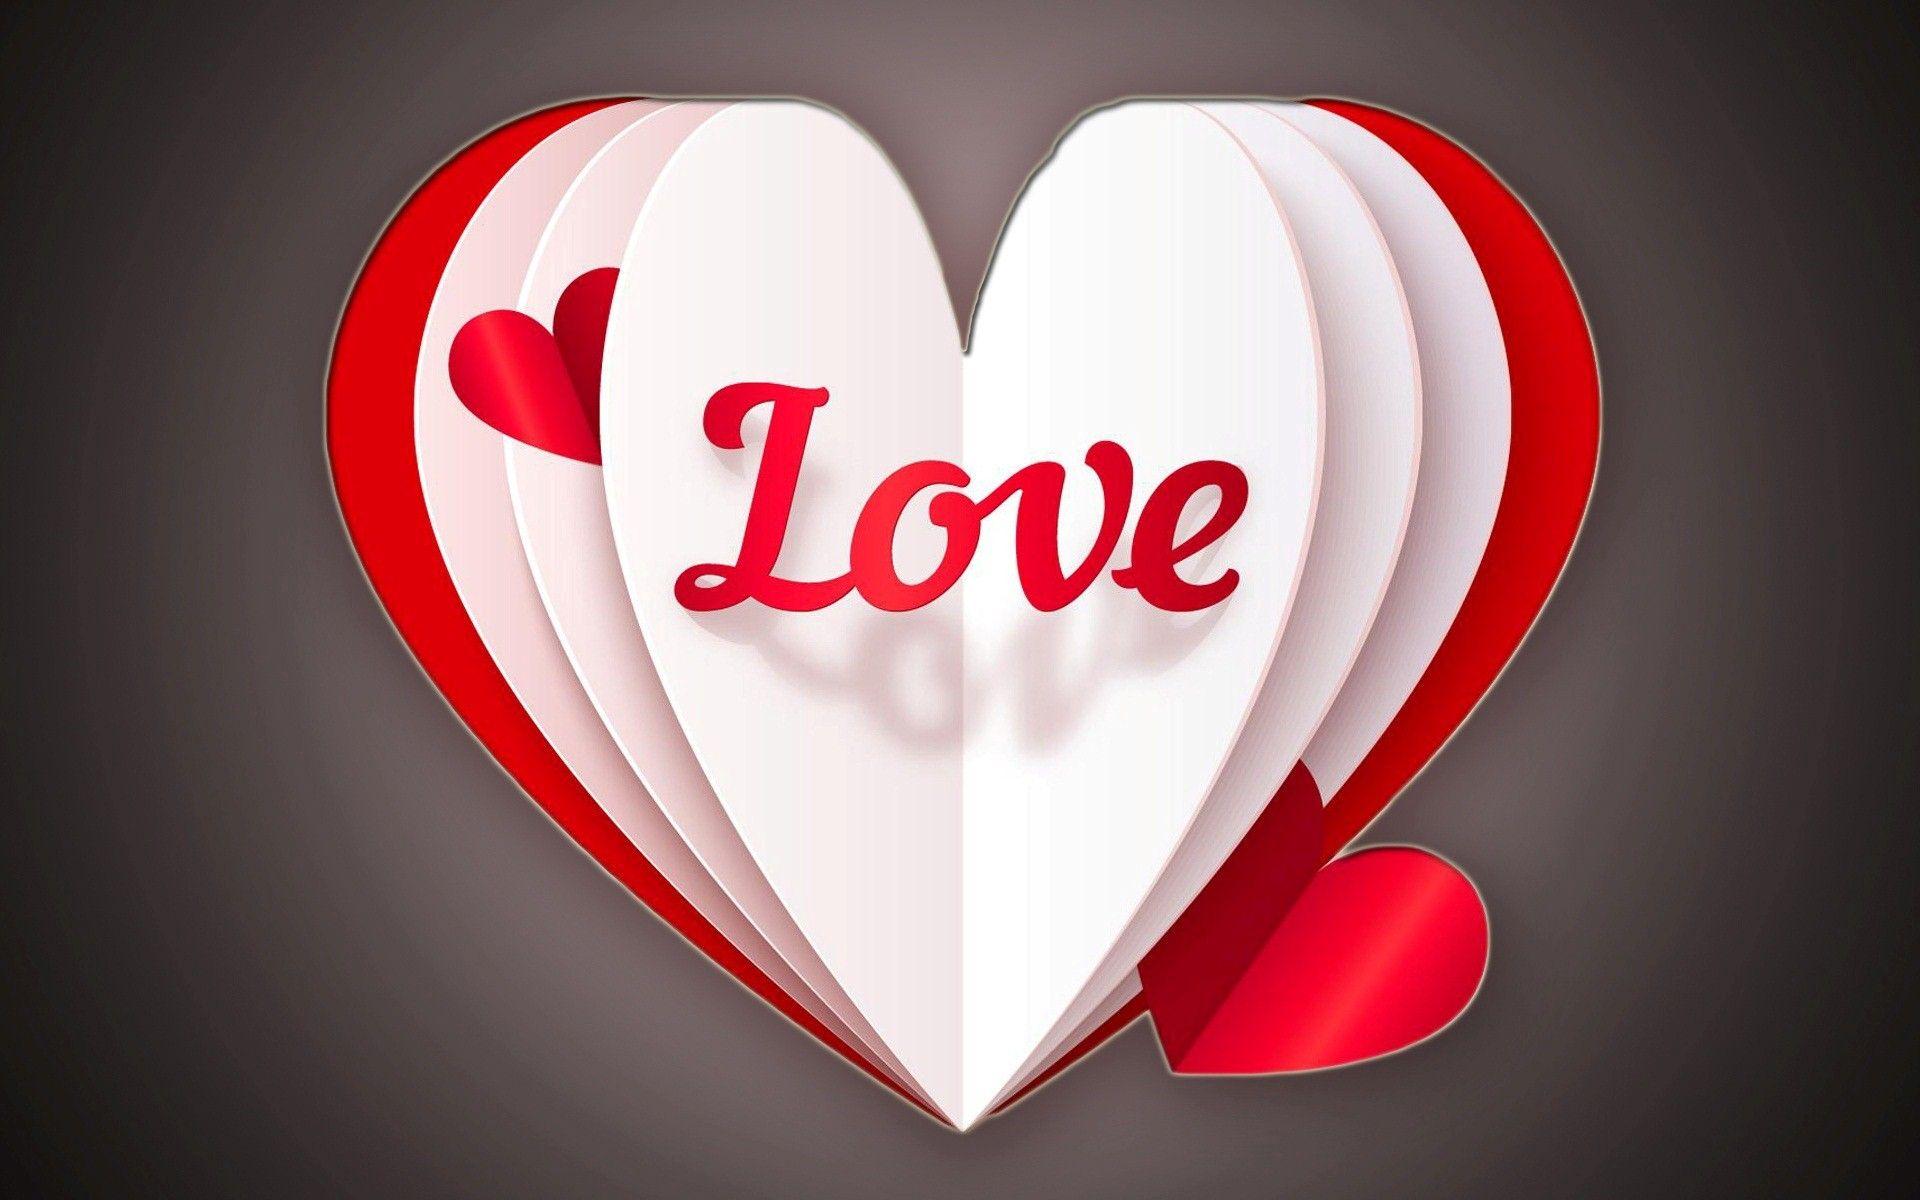 Love and Heart Wallpaper. Free Download HD Latest Beautiful Image